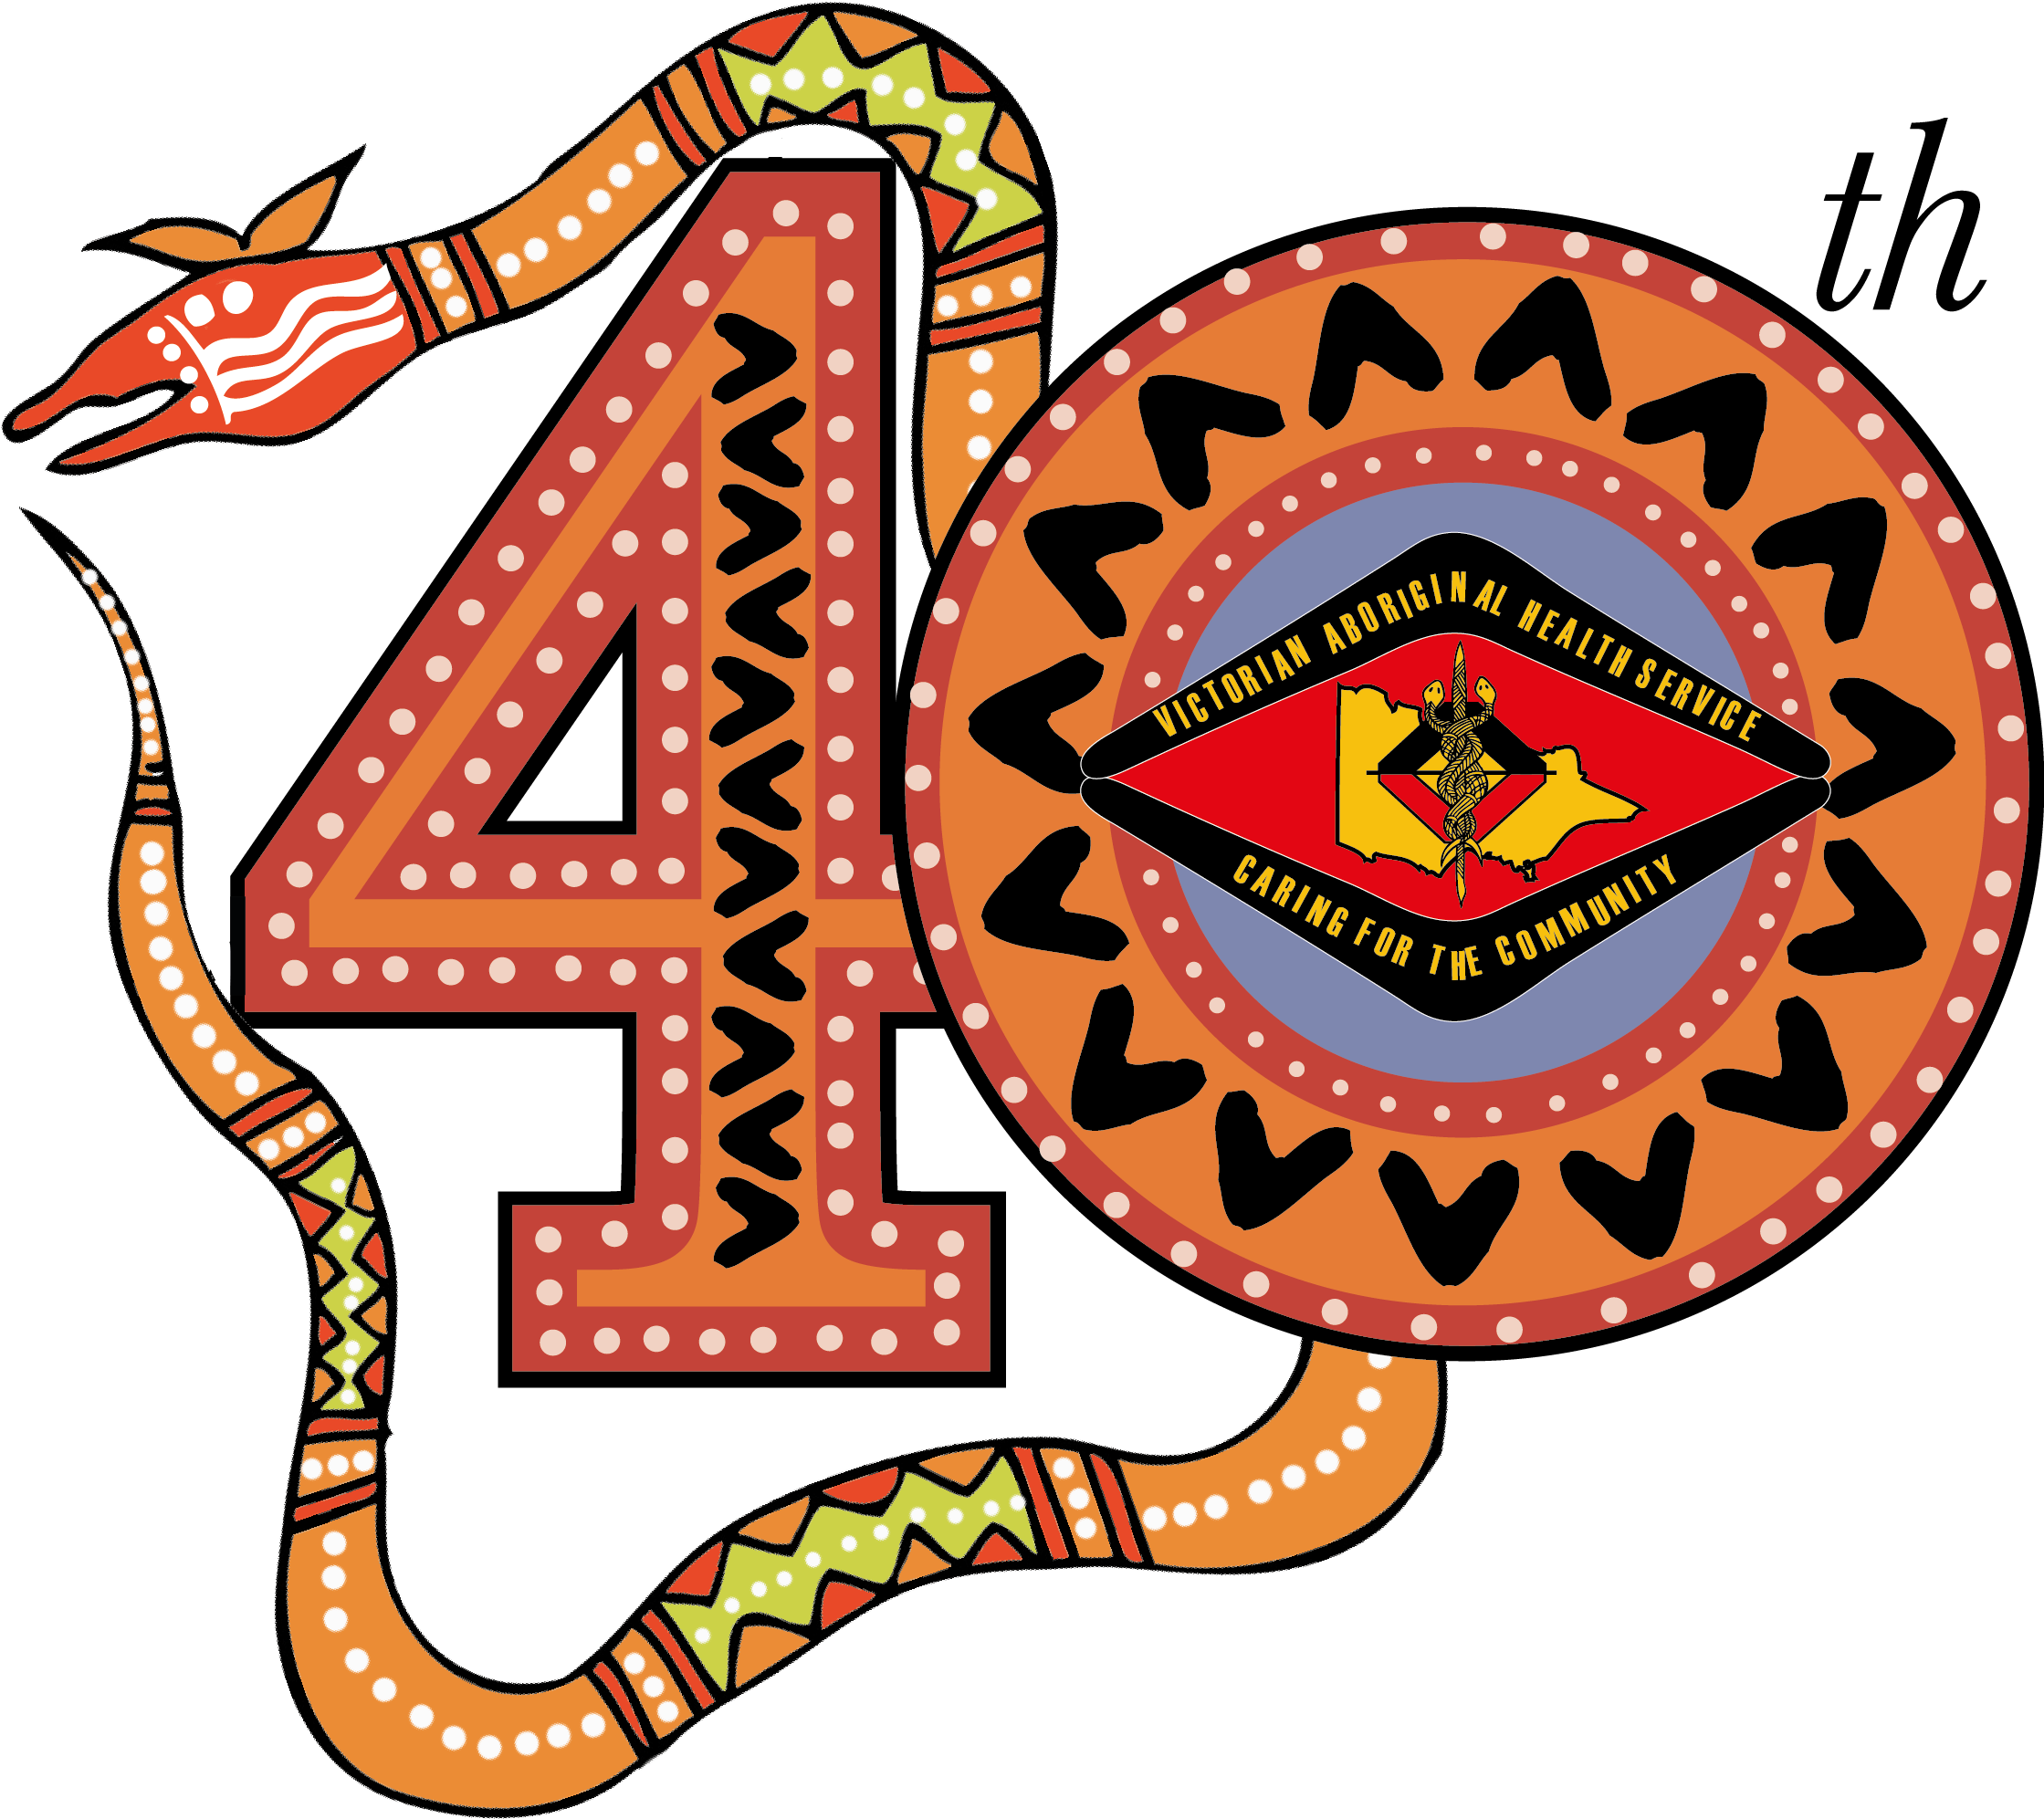 For Indigenous Australians, There Is A Congress Of - For Indigenous Australians, There Is A Congress Of (2636x2372)